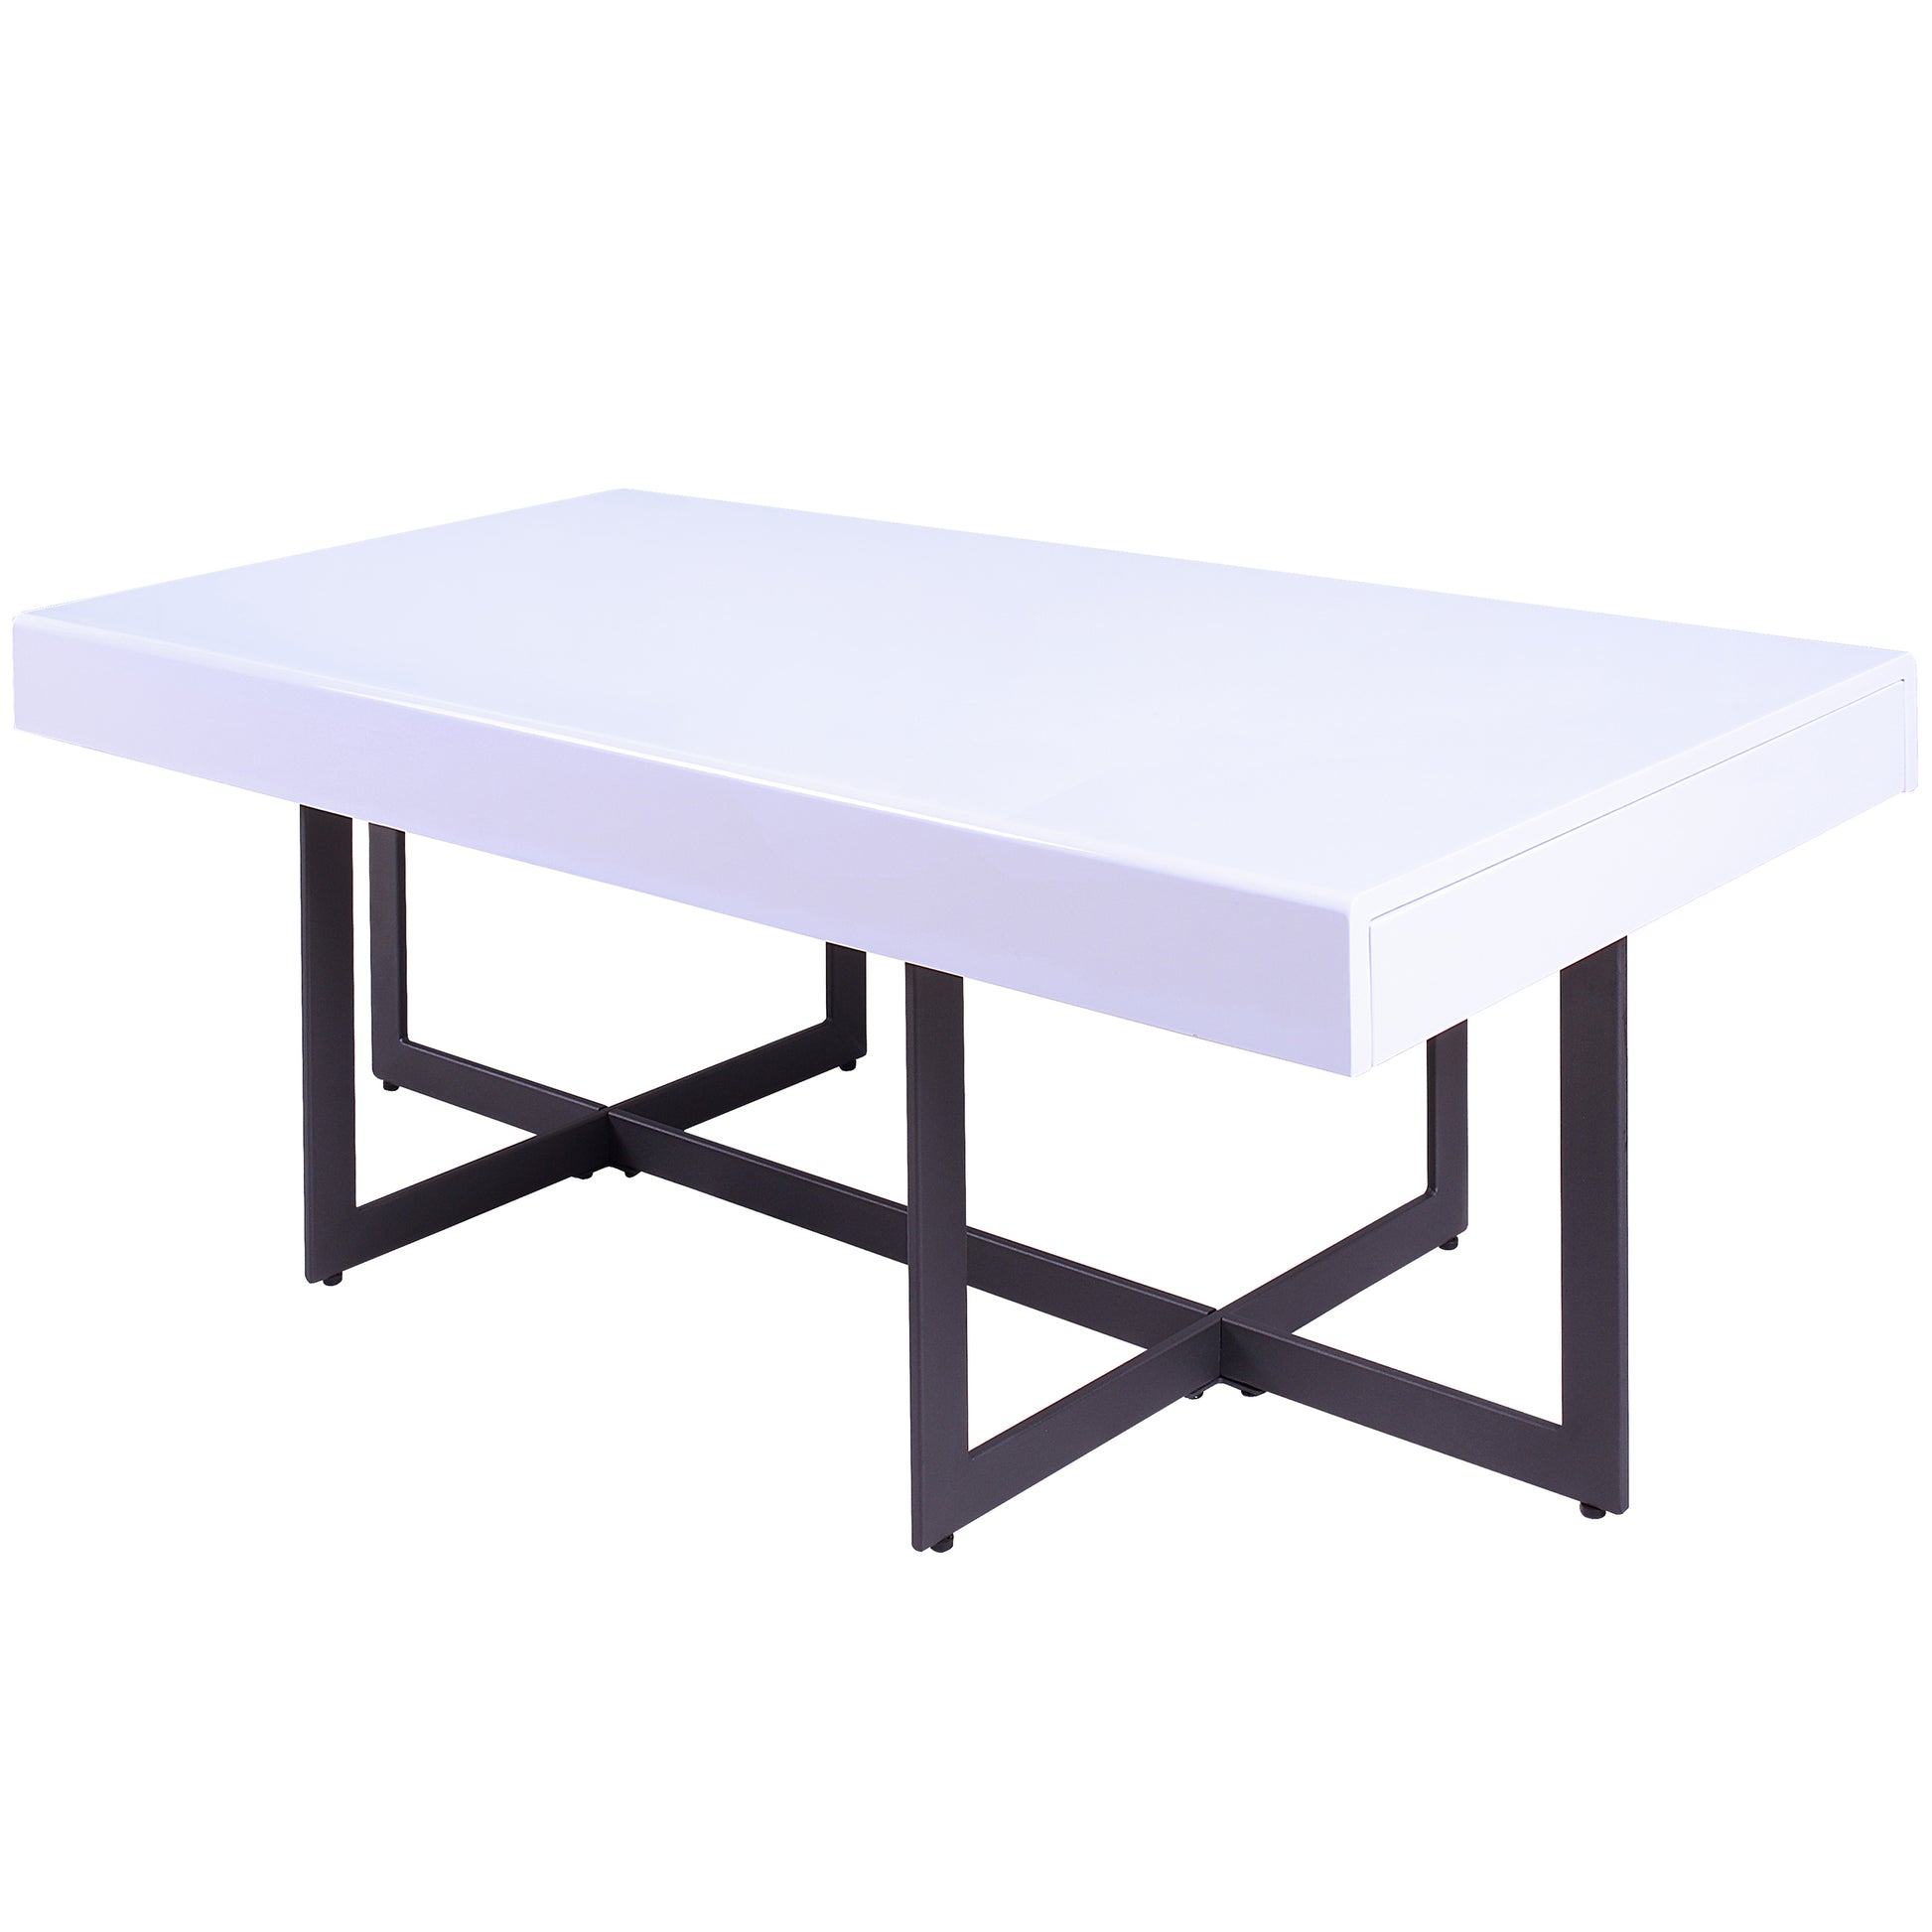 Left angled coffee table only from a three-piece modern white high gloss and gunmetal storage coffee table set with hidden drawers on a white background